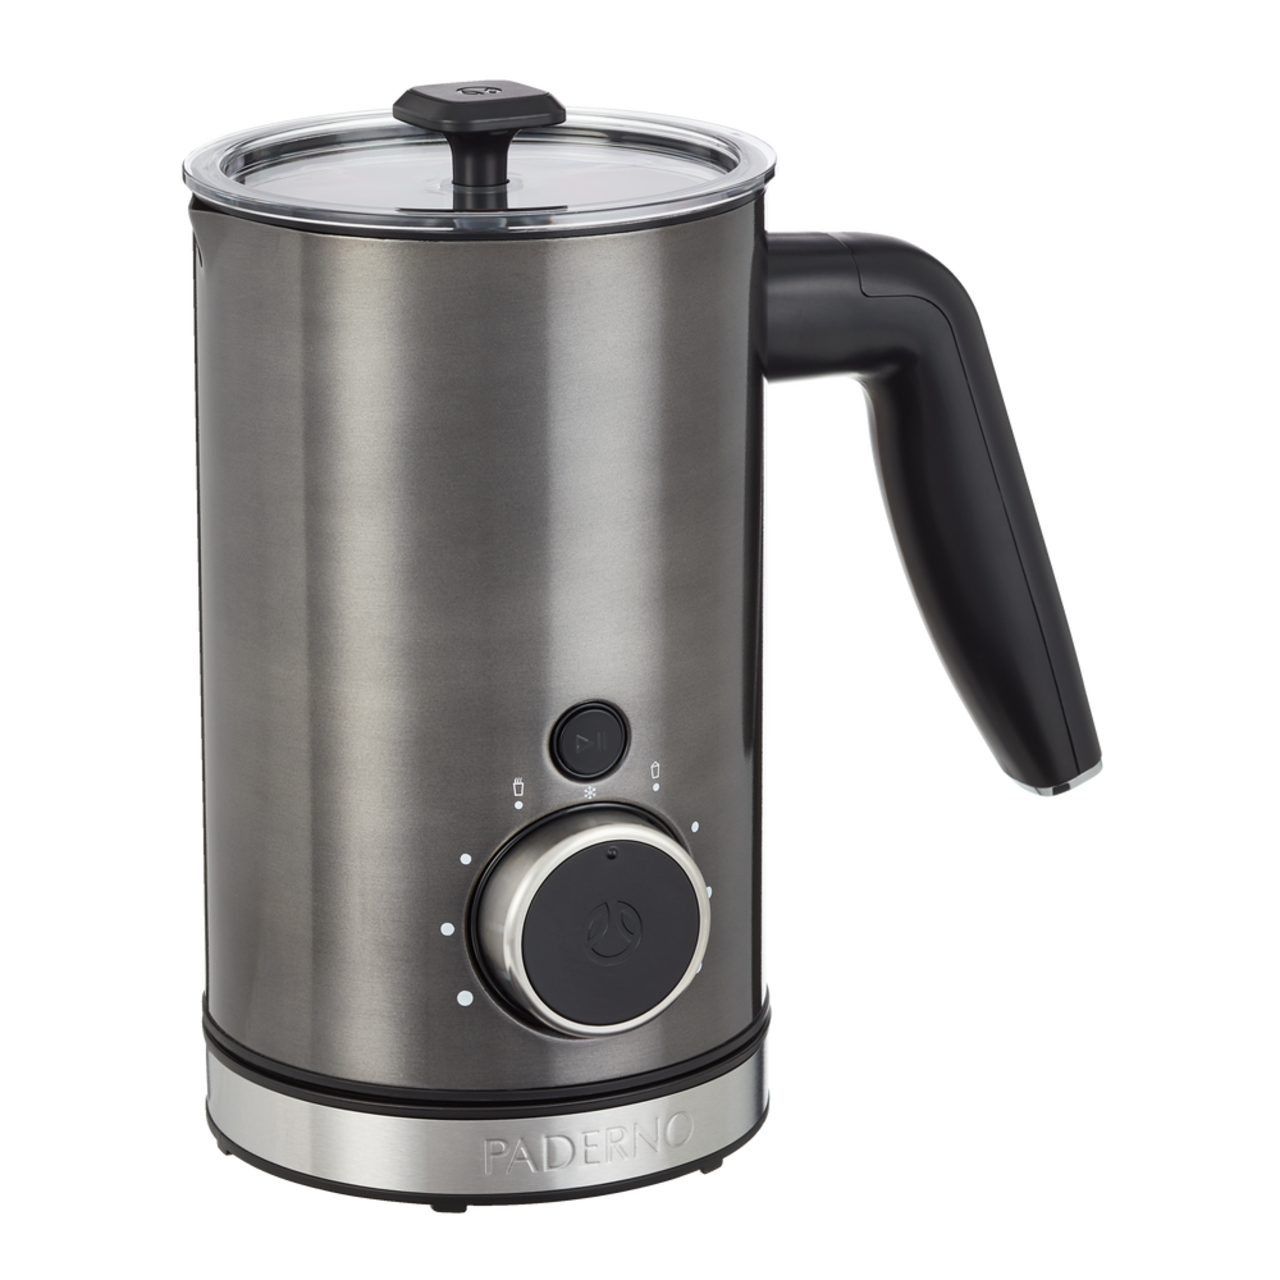 https://media-www.canadiantire.ca/product/living/kitchen/kitchen-appliances/0432735/paderno-milk-frother-55c6972e-f4e0-4094-8d5c-047a2a271240.png?imdensity=1&imwidth=640&impolicy=mZoom